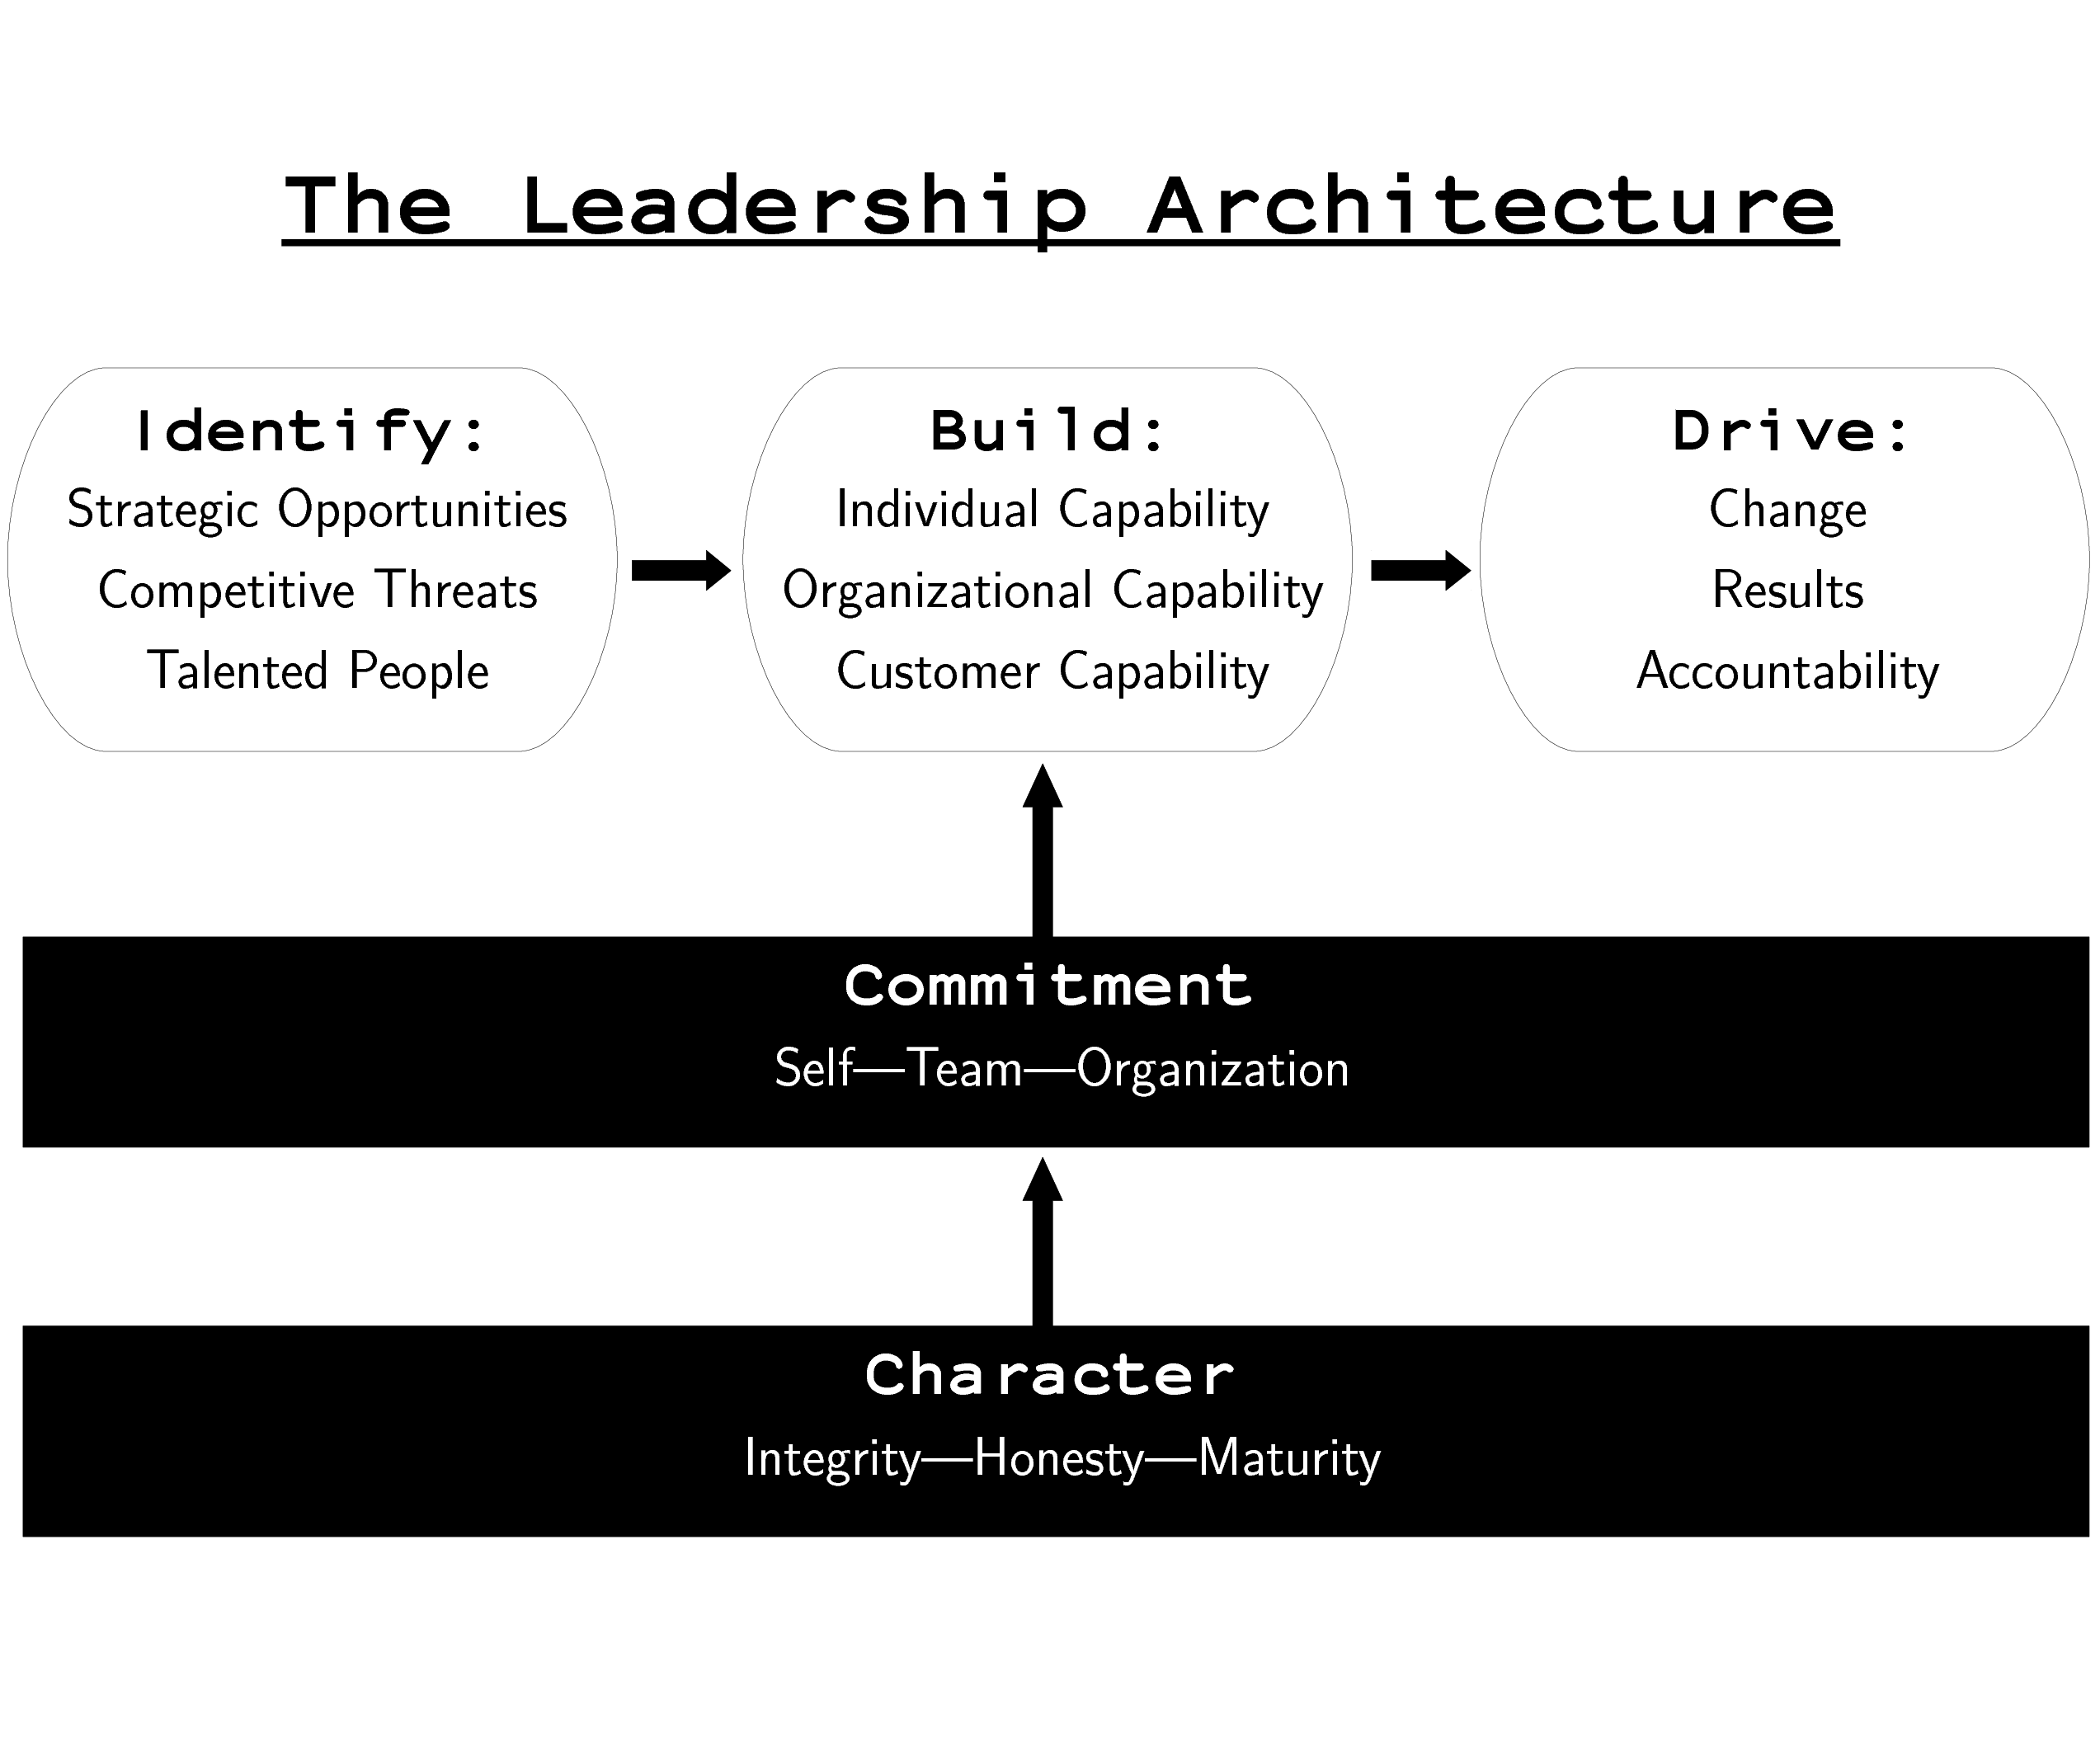 The Leadership Architecture